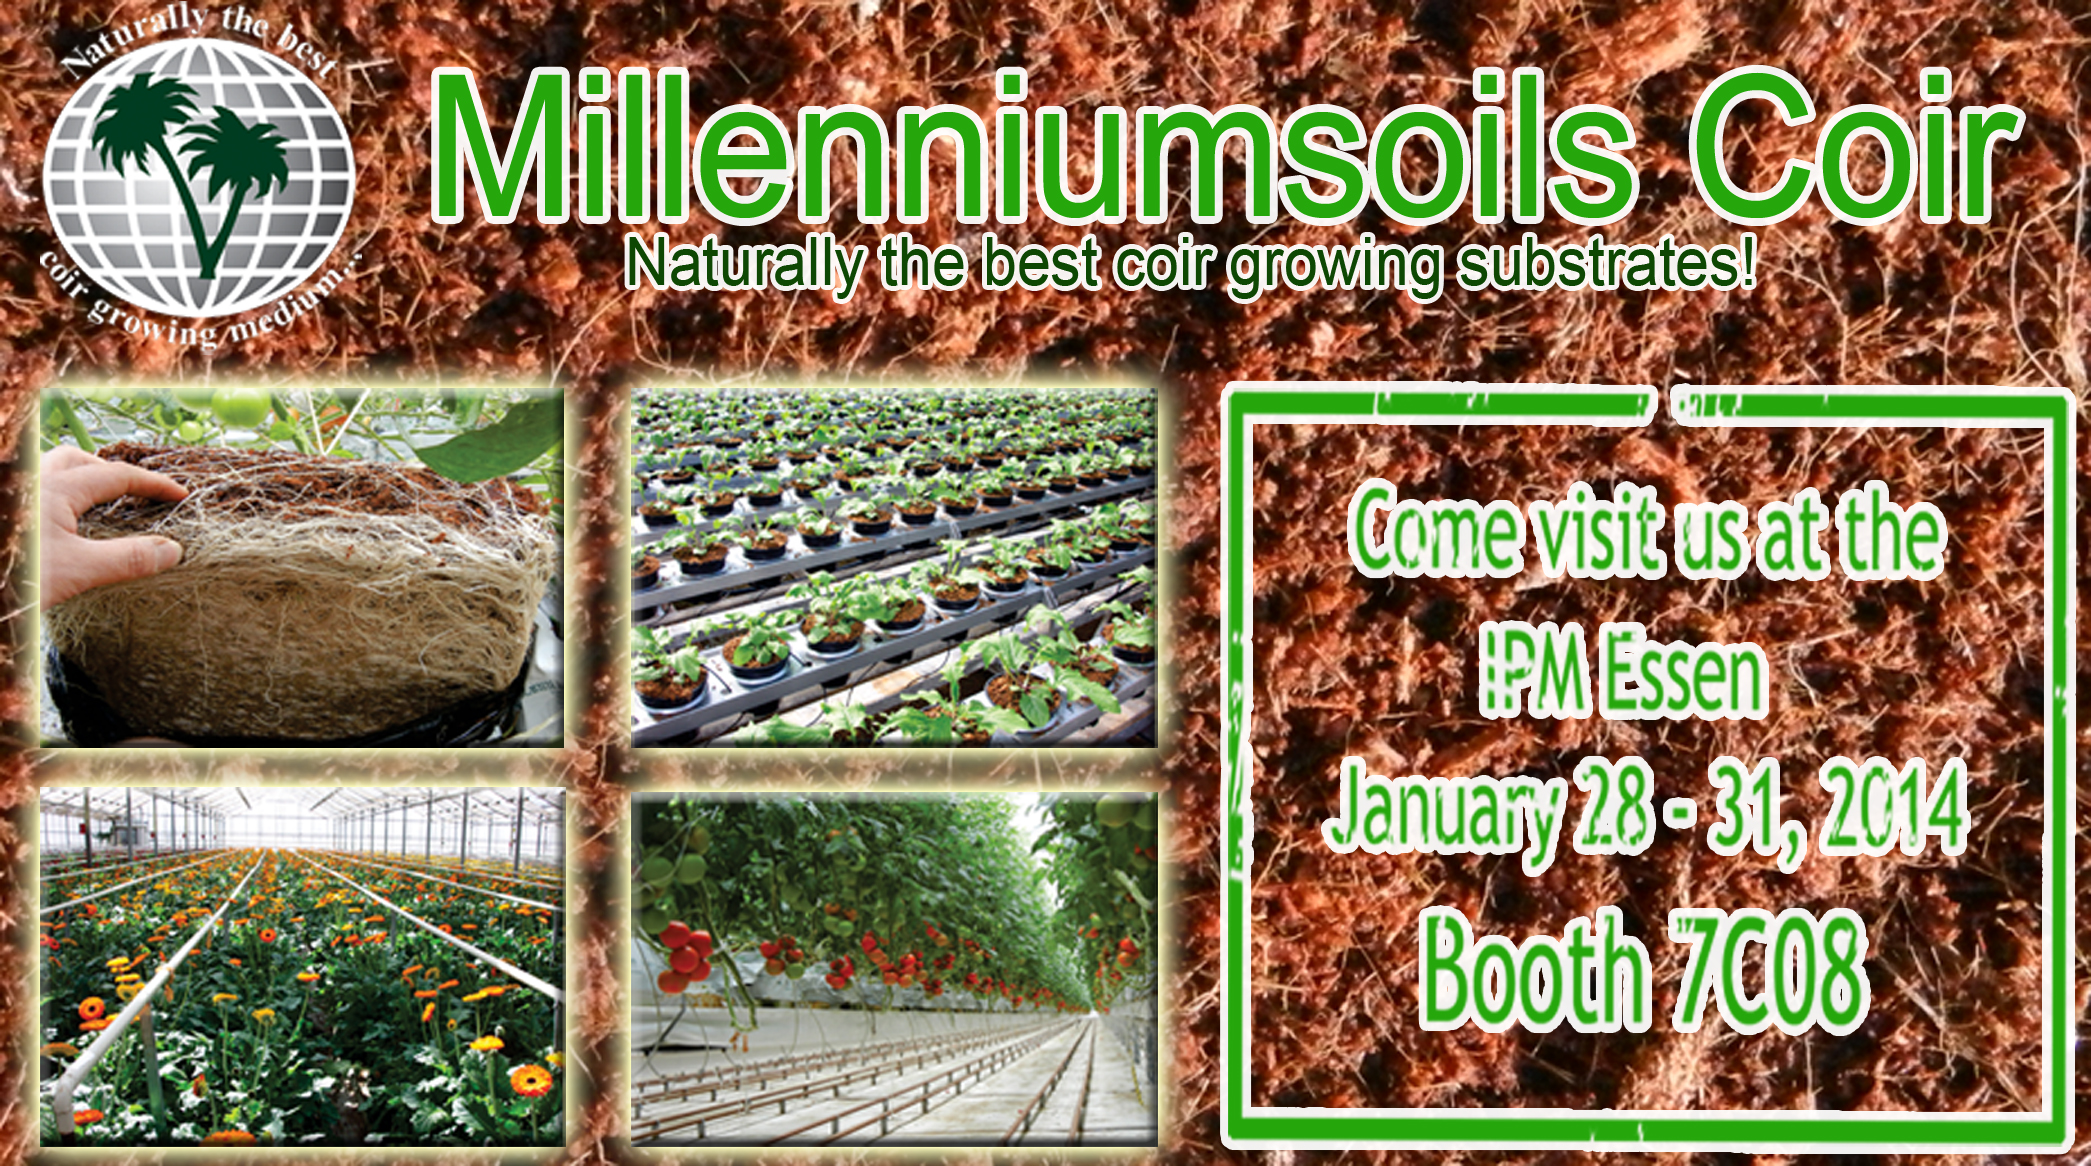 Come see the NEW products that Millenniumsoils Coir has to offer for 2014!